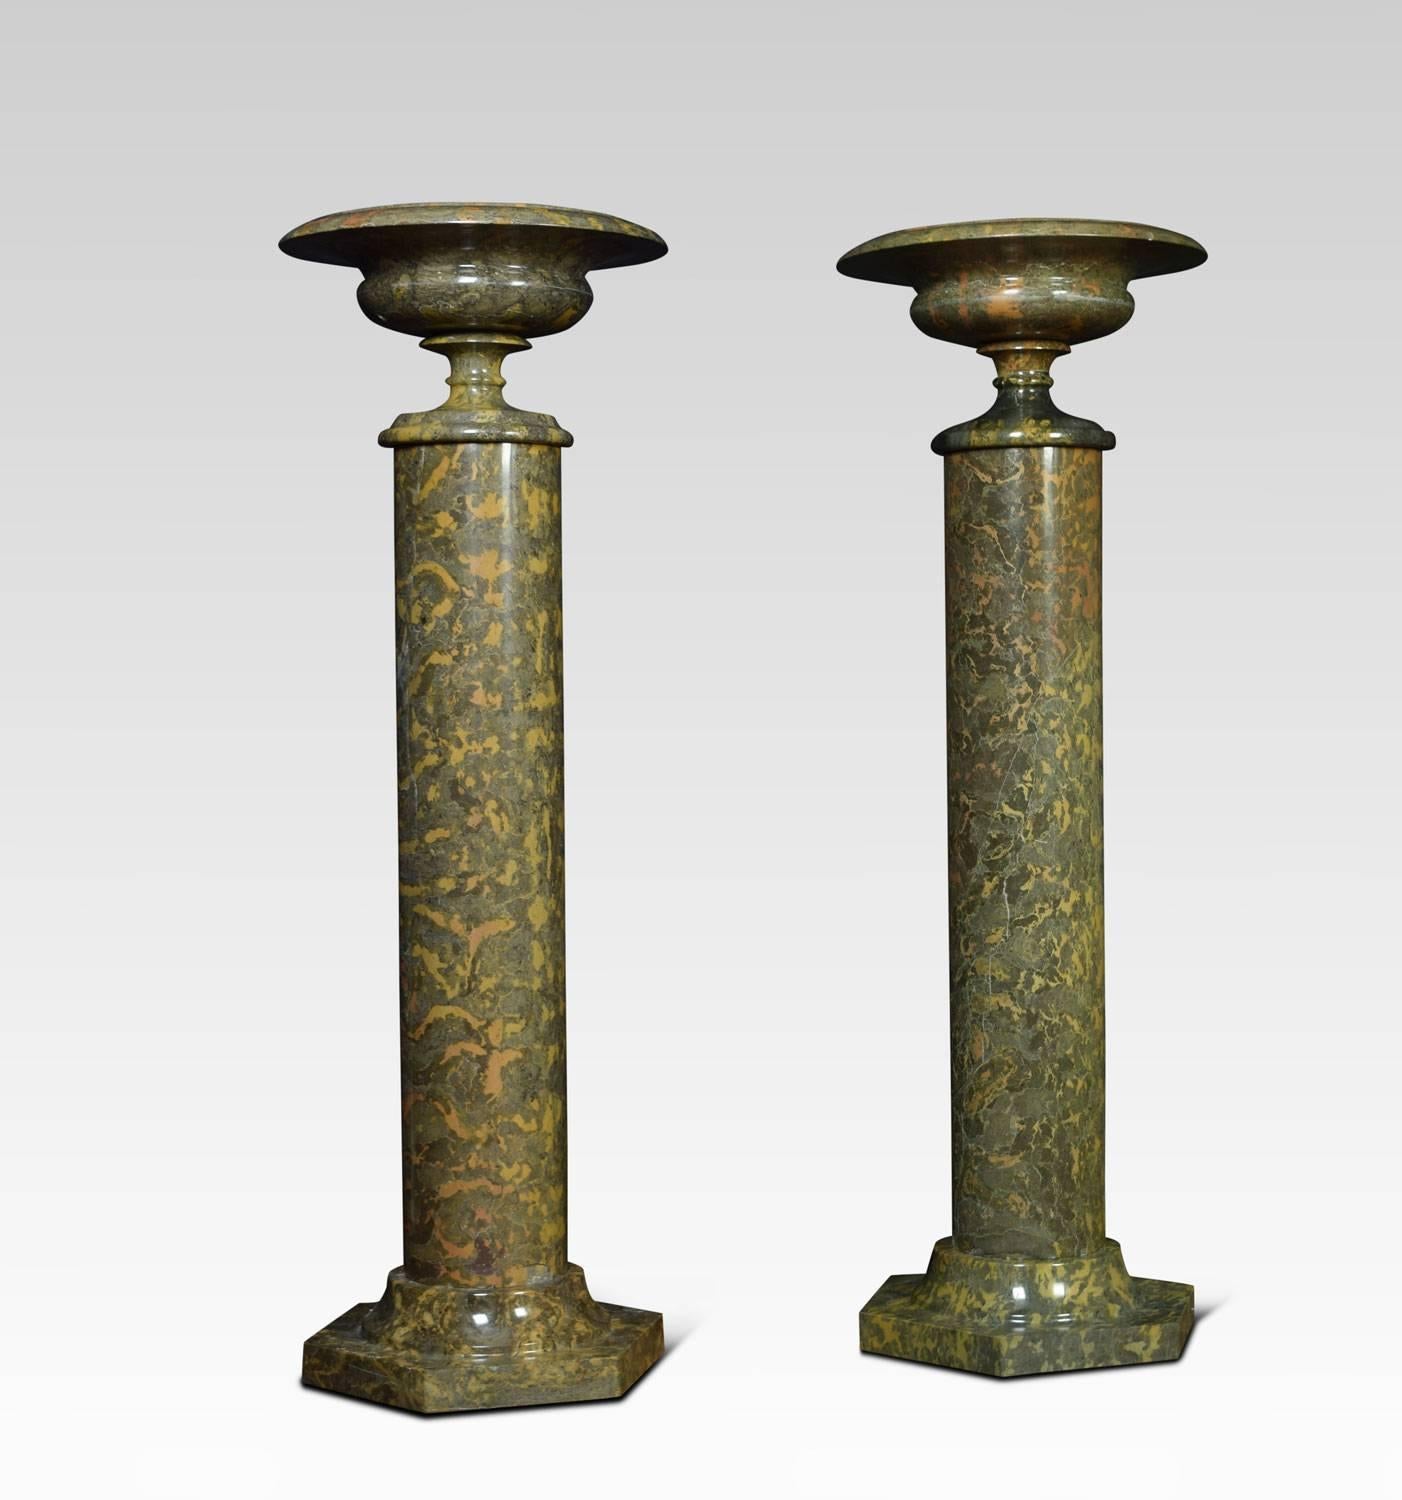 A pair of floor standing mottled green and ochre marble columns of good scale together with a pair of tazzas, having finely turned bowls and scocles.
This pair of columns and tazze would have been made to stand either side of a grand commode or